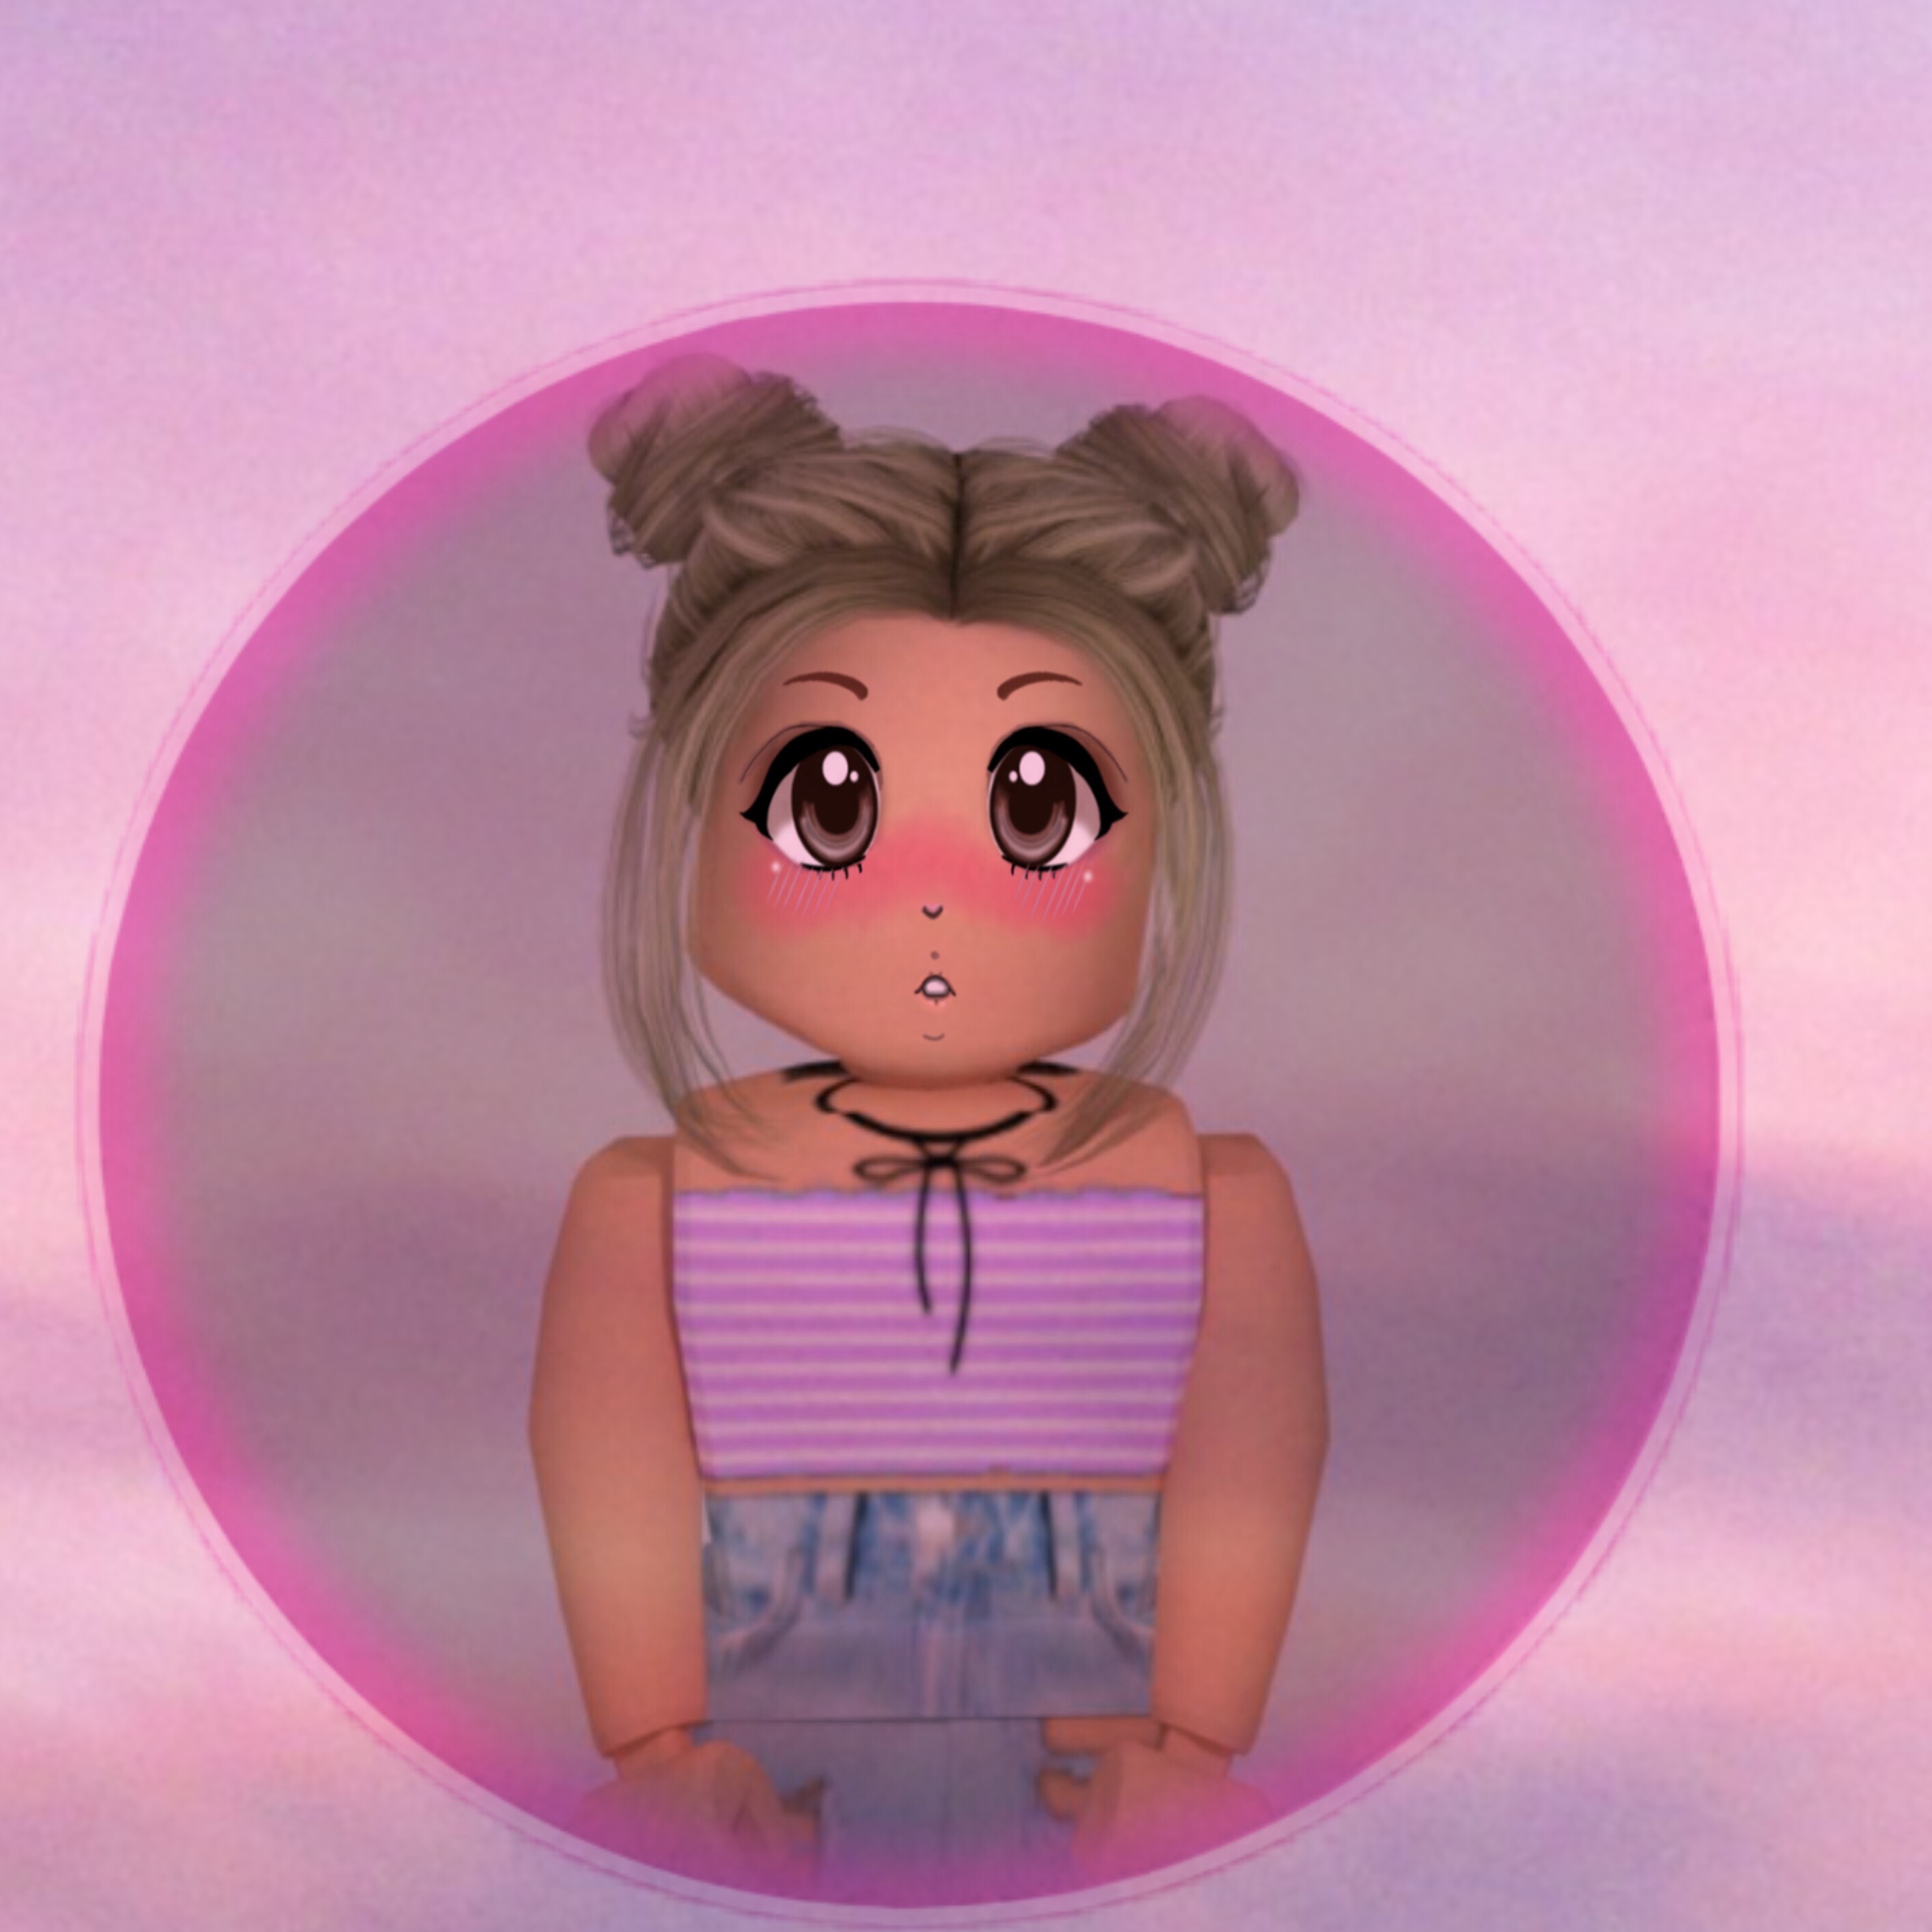 Roblox Gfx Pink Adorable Cute Image By Ivana1995alejo - beautiful aesthetic roblox girl gfx pink